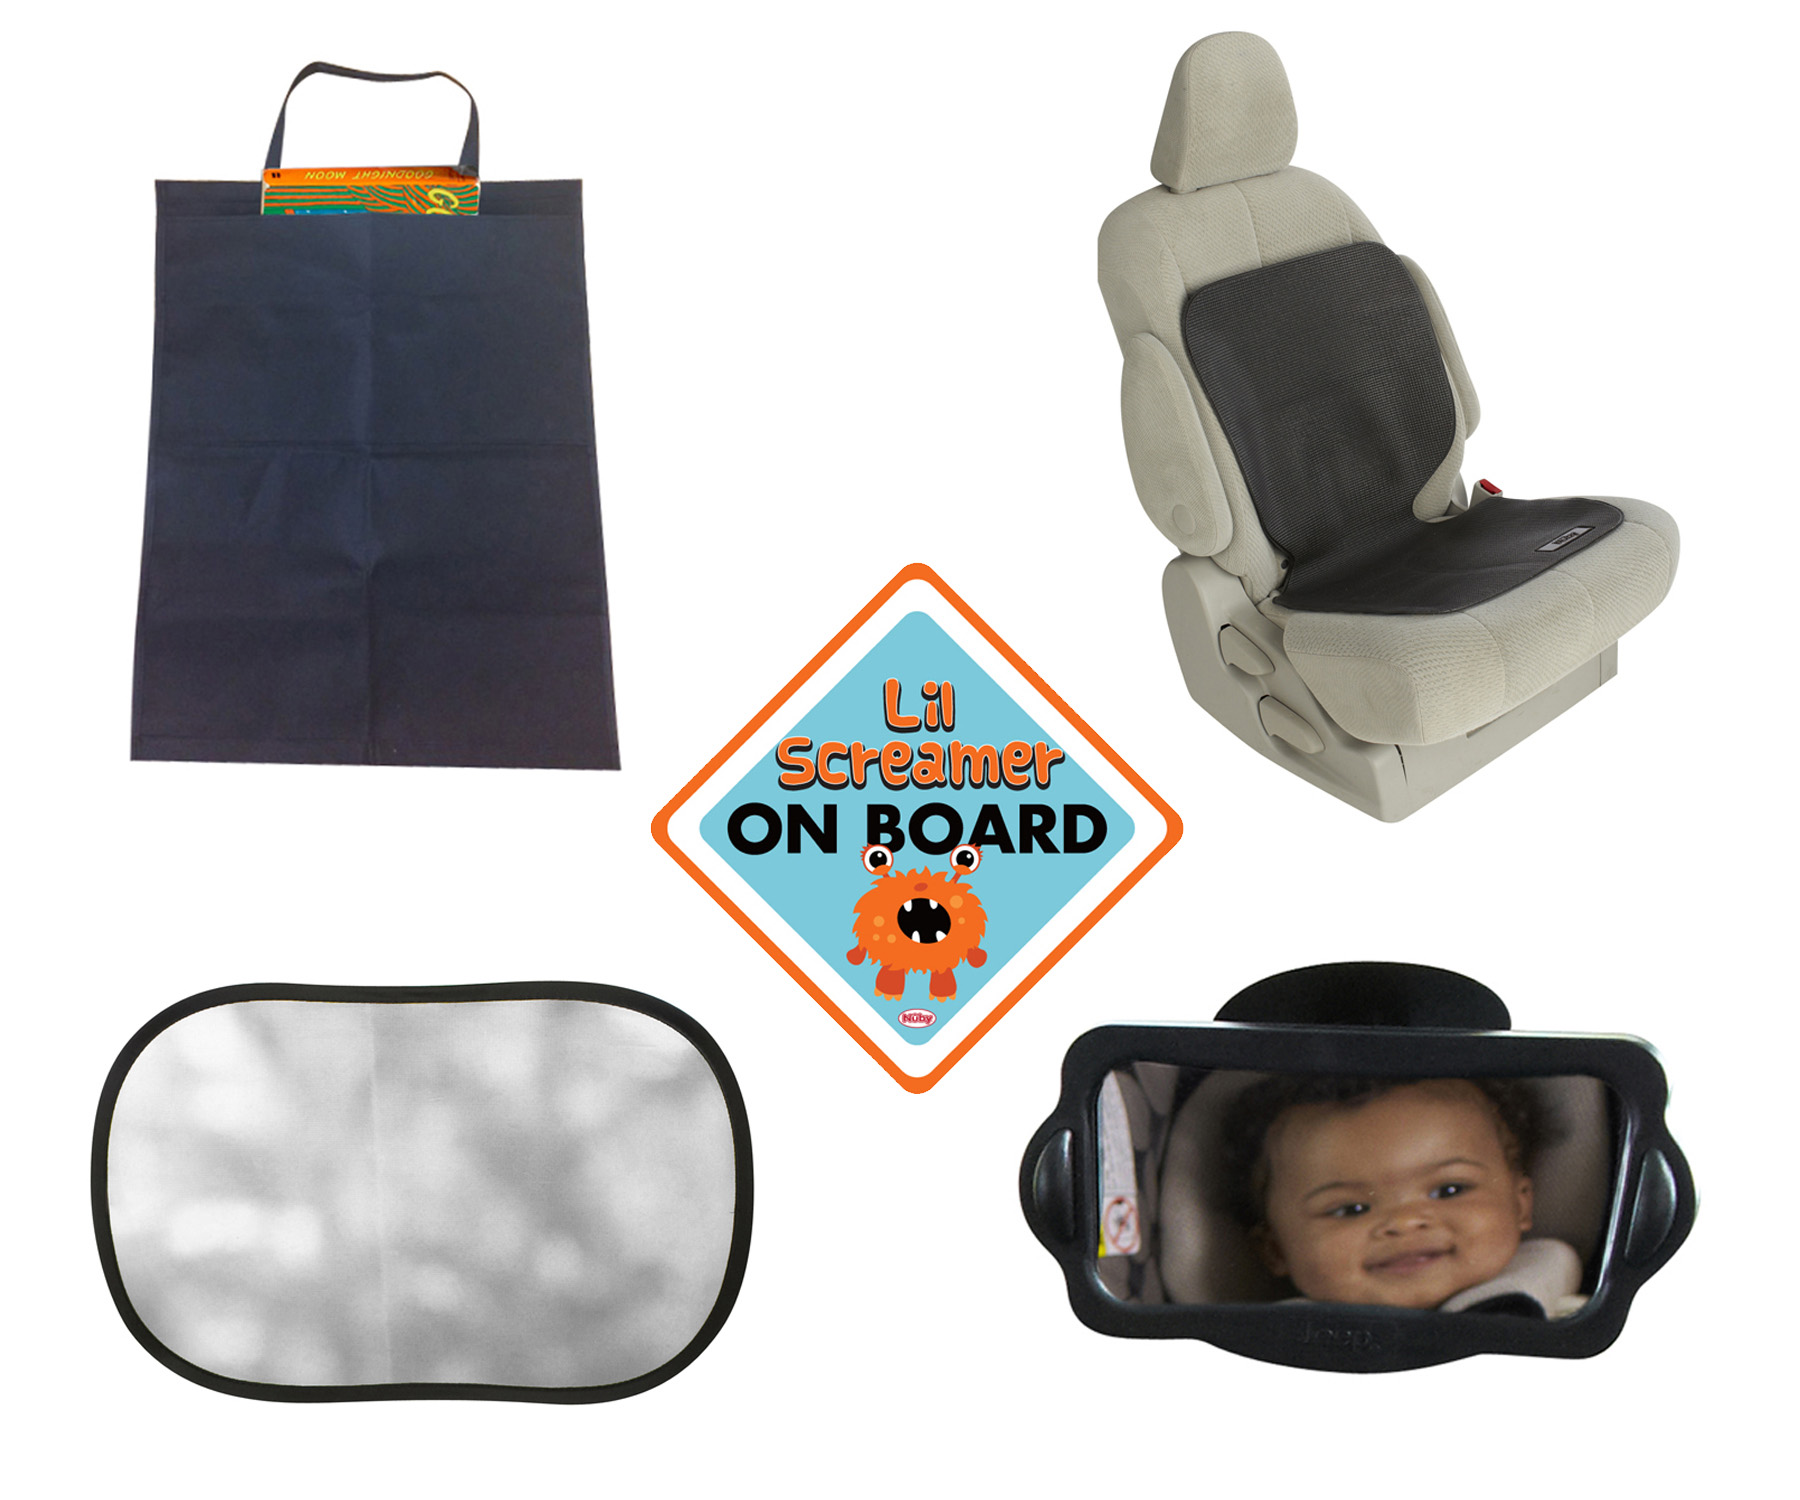  Nuby Kids Kick Mats- Back Seat Protectors with Storage  Compartment: Black, 2 Pack : Baby